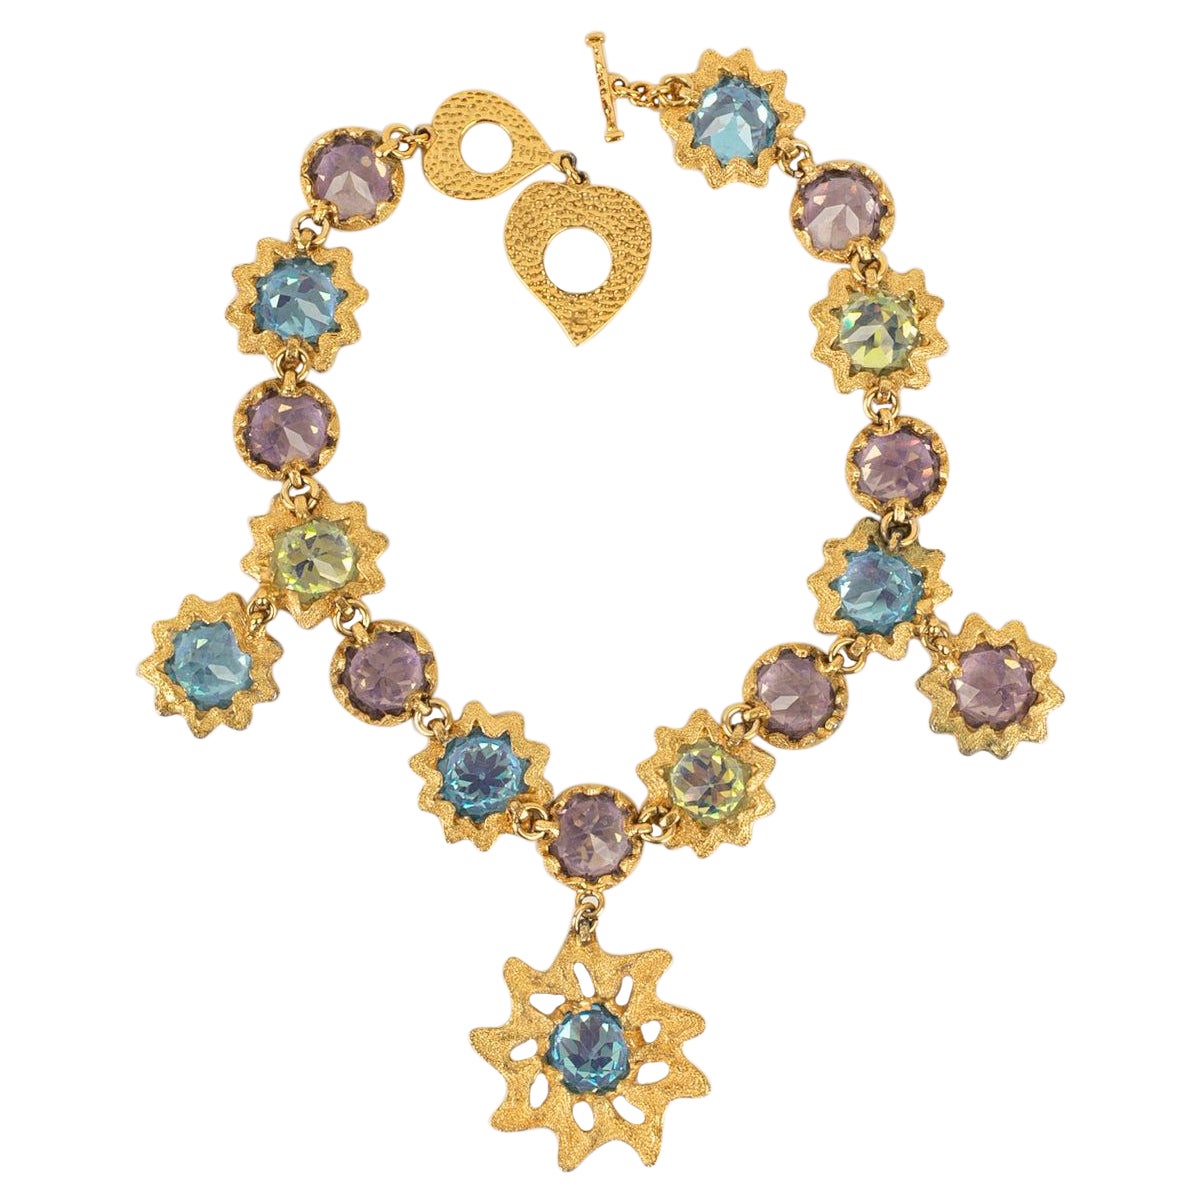 Yves Saint Laurent Short Necklace In Gold-Plated Metal and Rhinestones For Sale